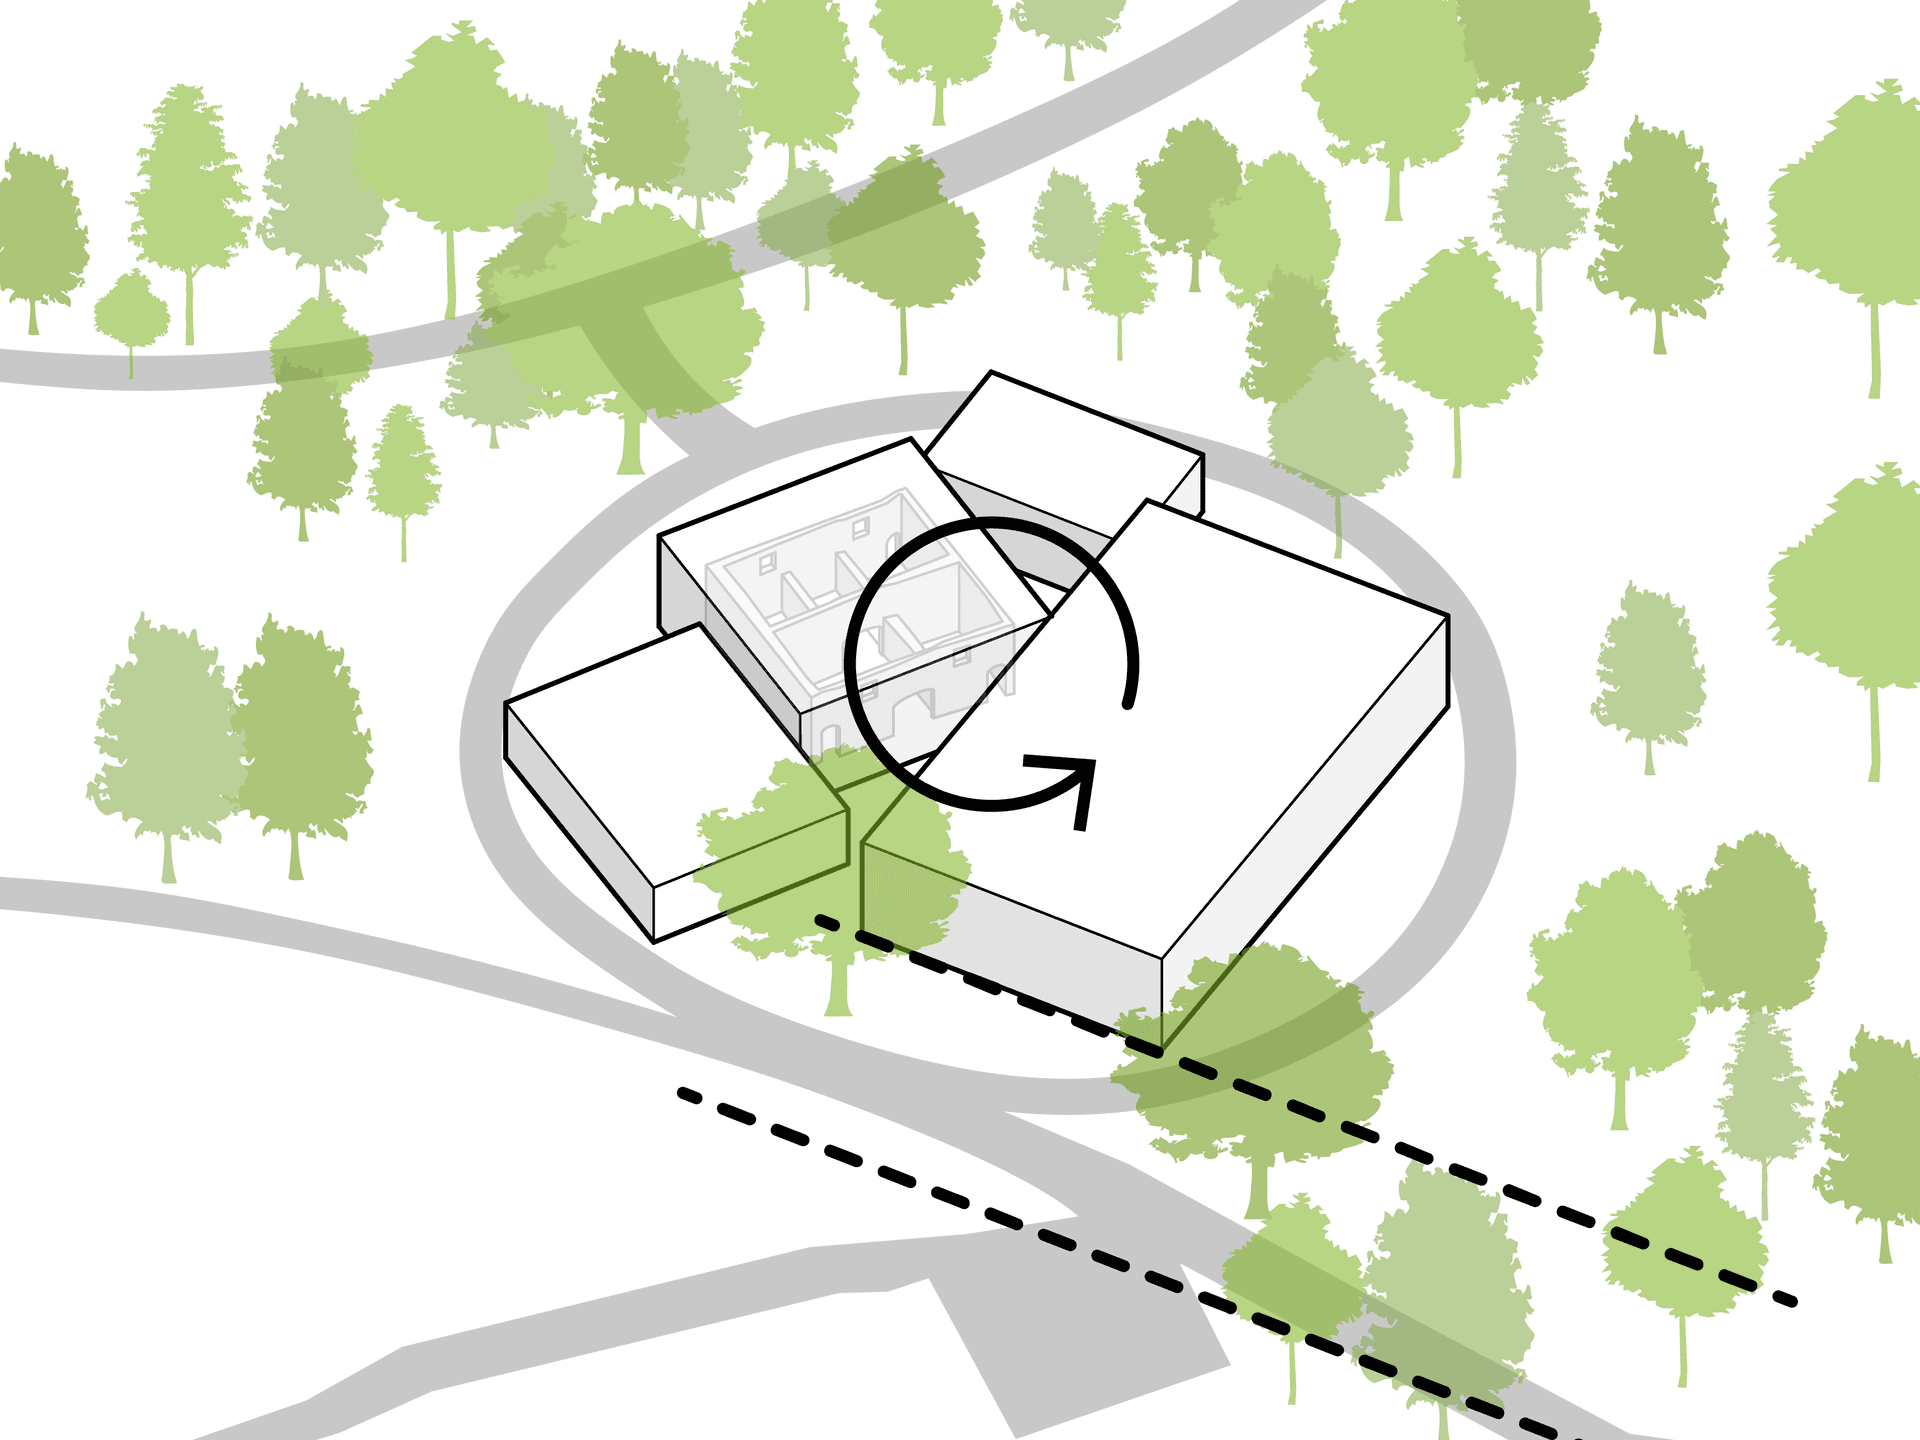 The volumes are rotate to save trees where possible and to create a welcoming approach from the Claremont Grounds entrance path.